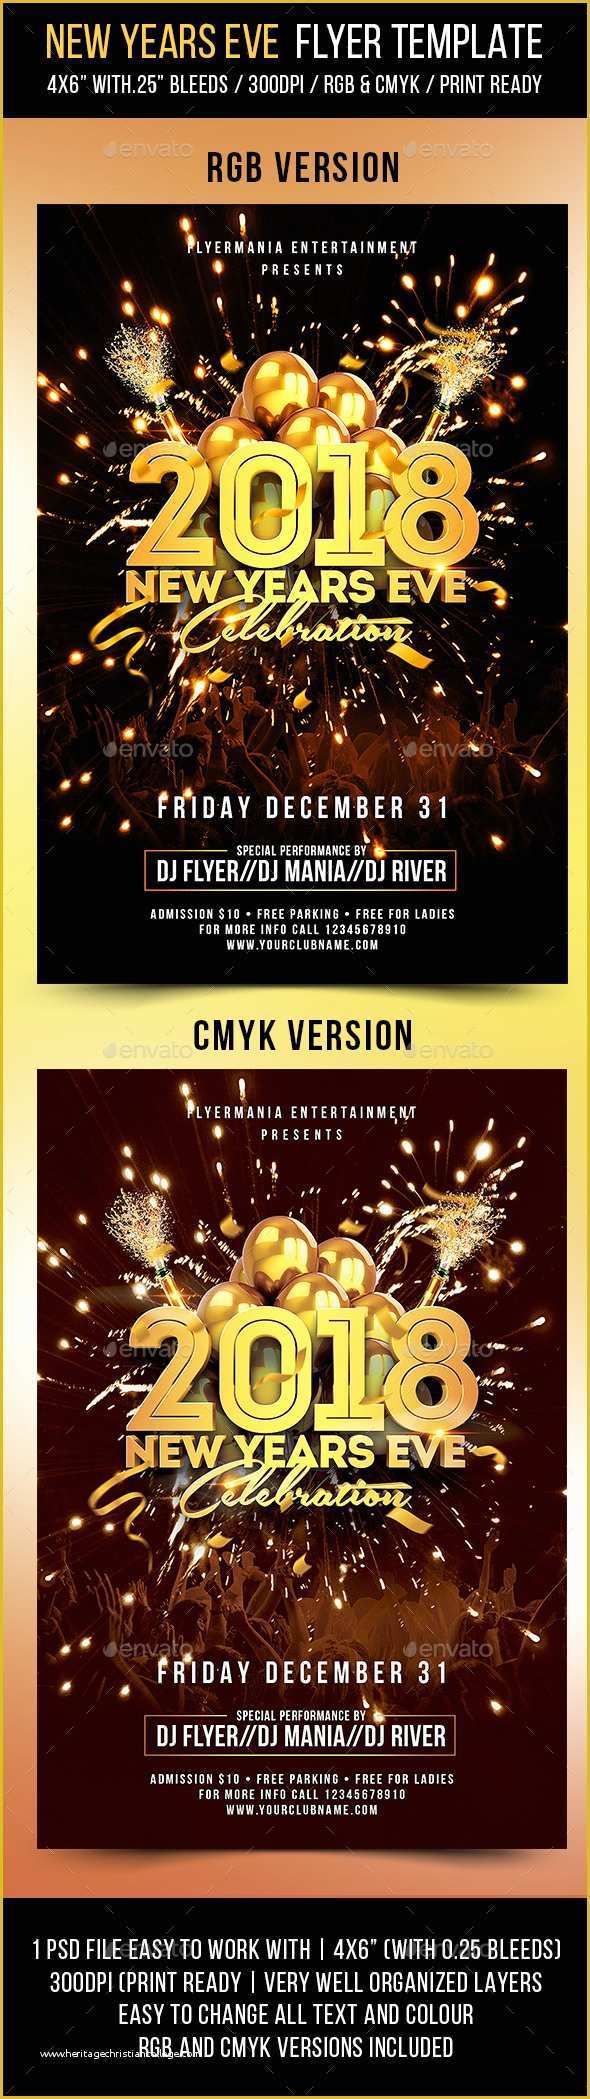 Free New Years Eve Flyer Template Of New Years Eve Flyer Template by Flyermania